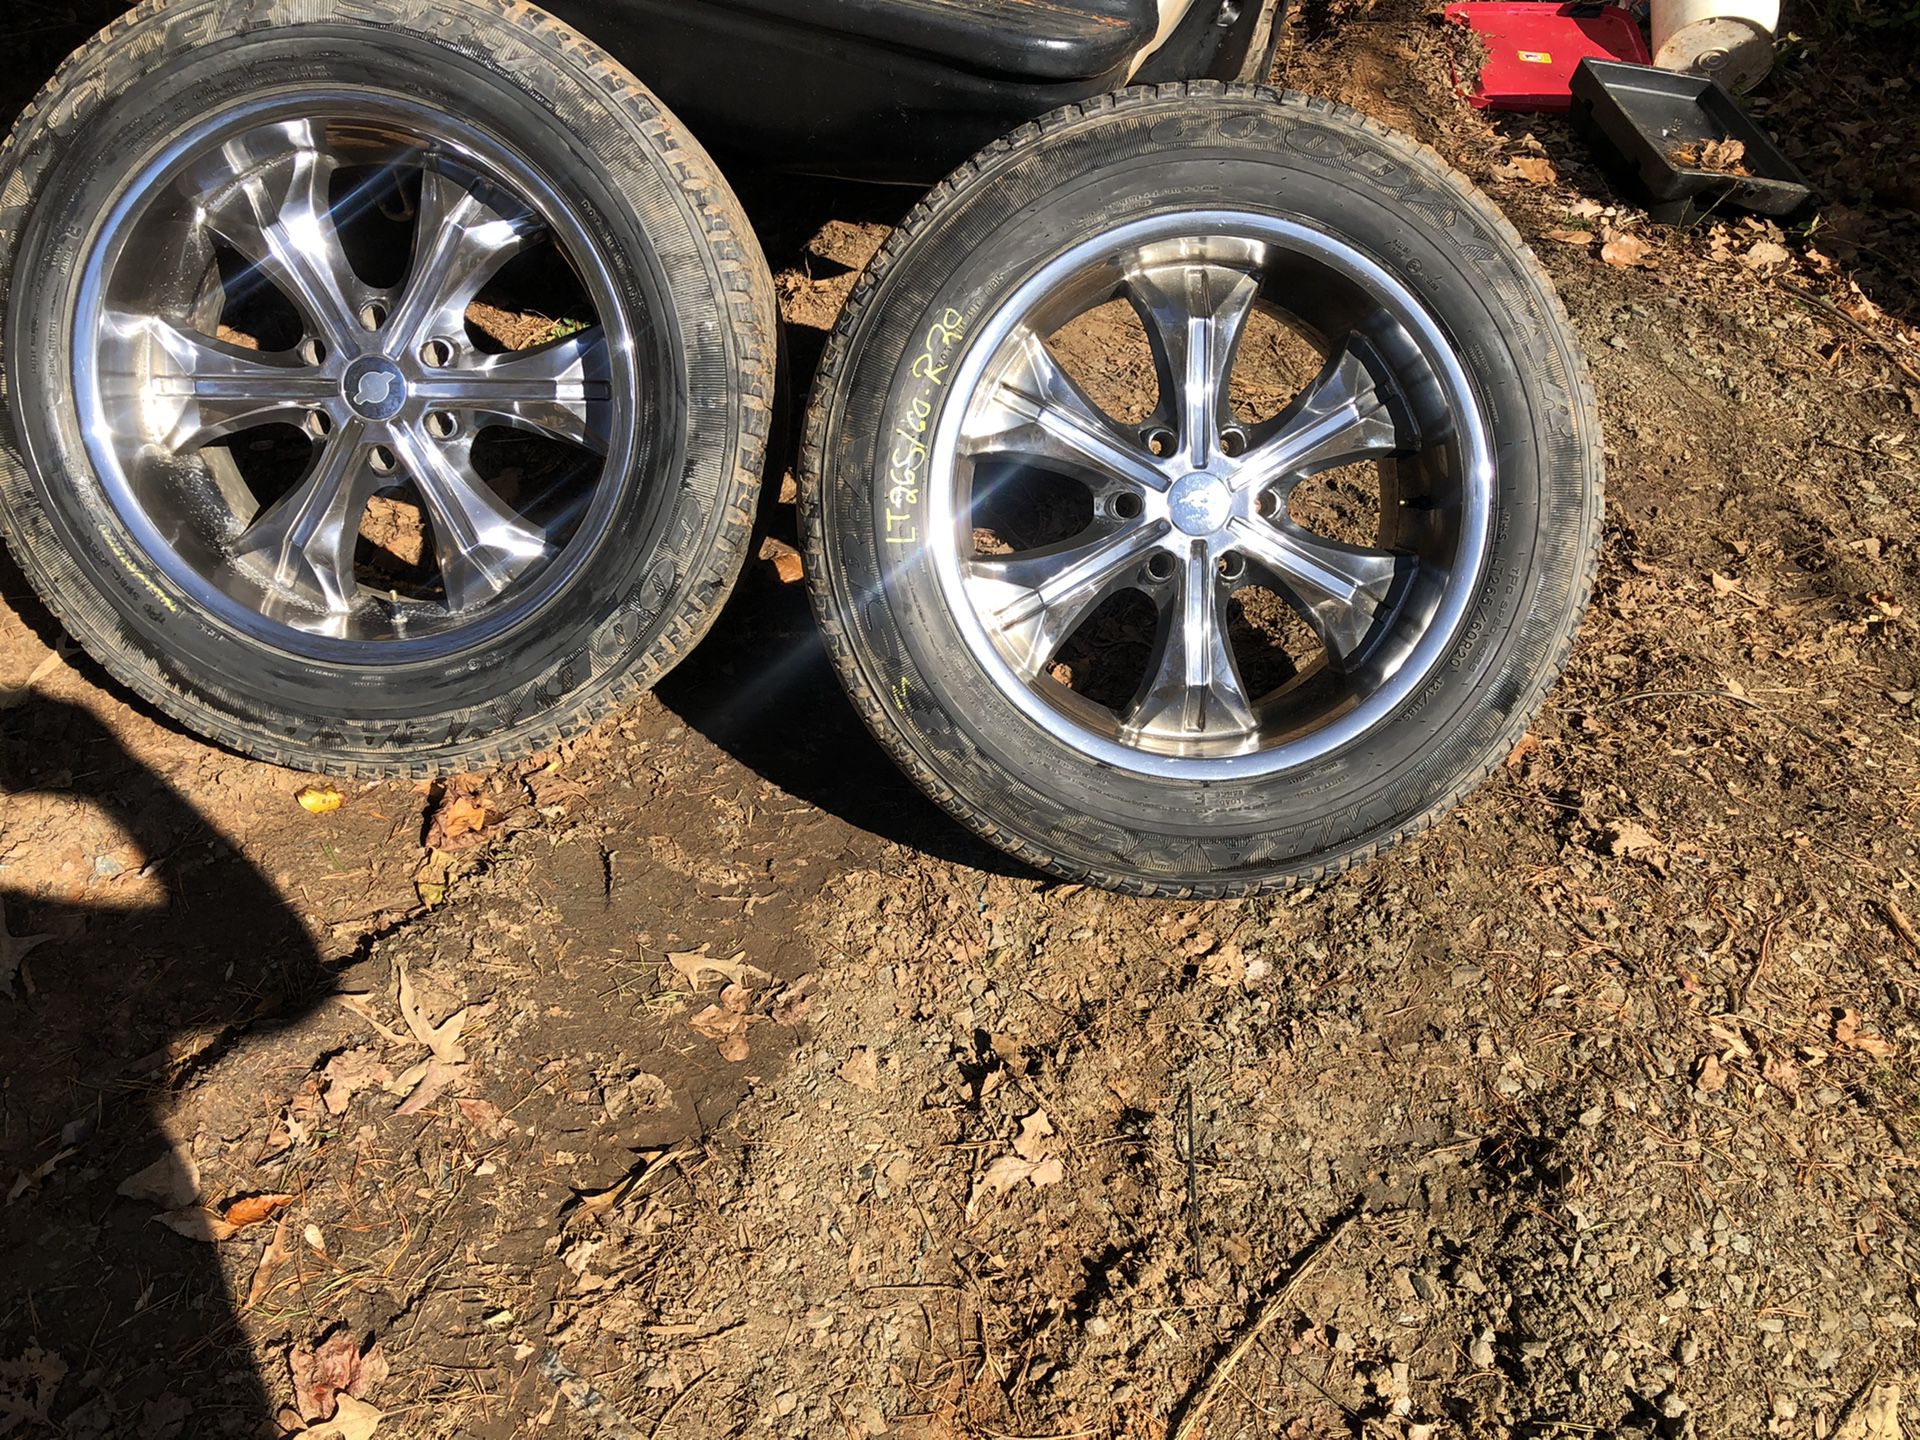 SSR 20s 33 tires go with